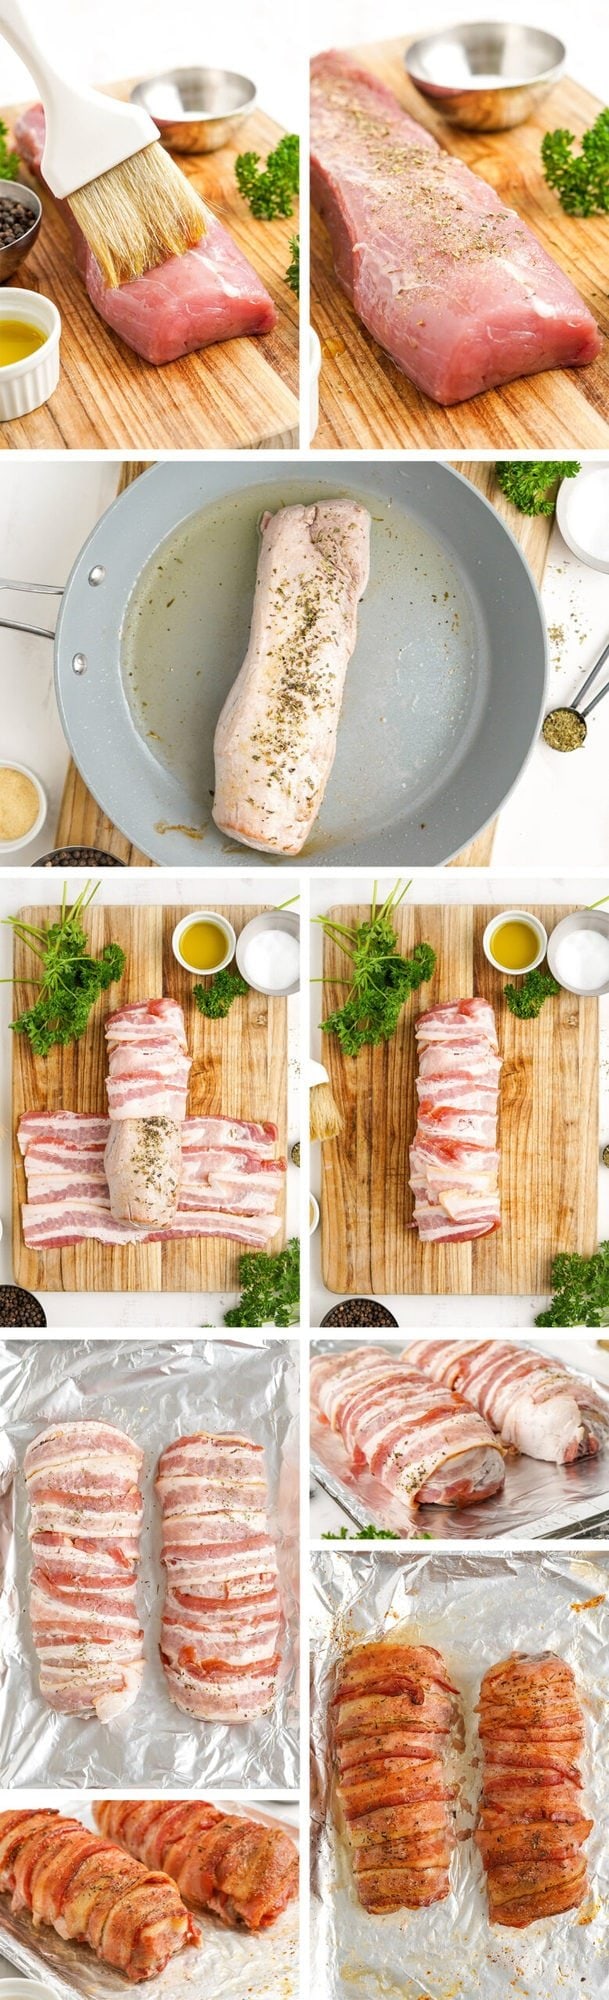 collage of images showing how to prepare and wrap a bacon wrapped pork tenderloin